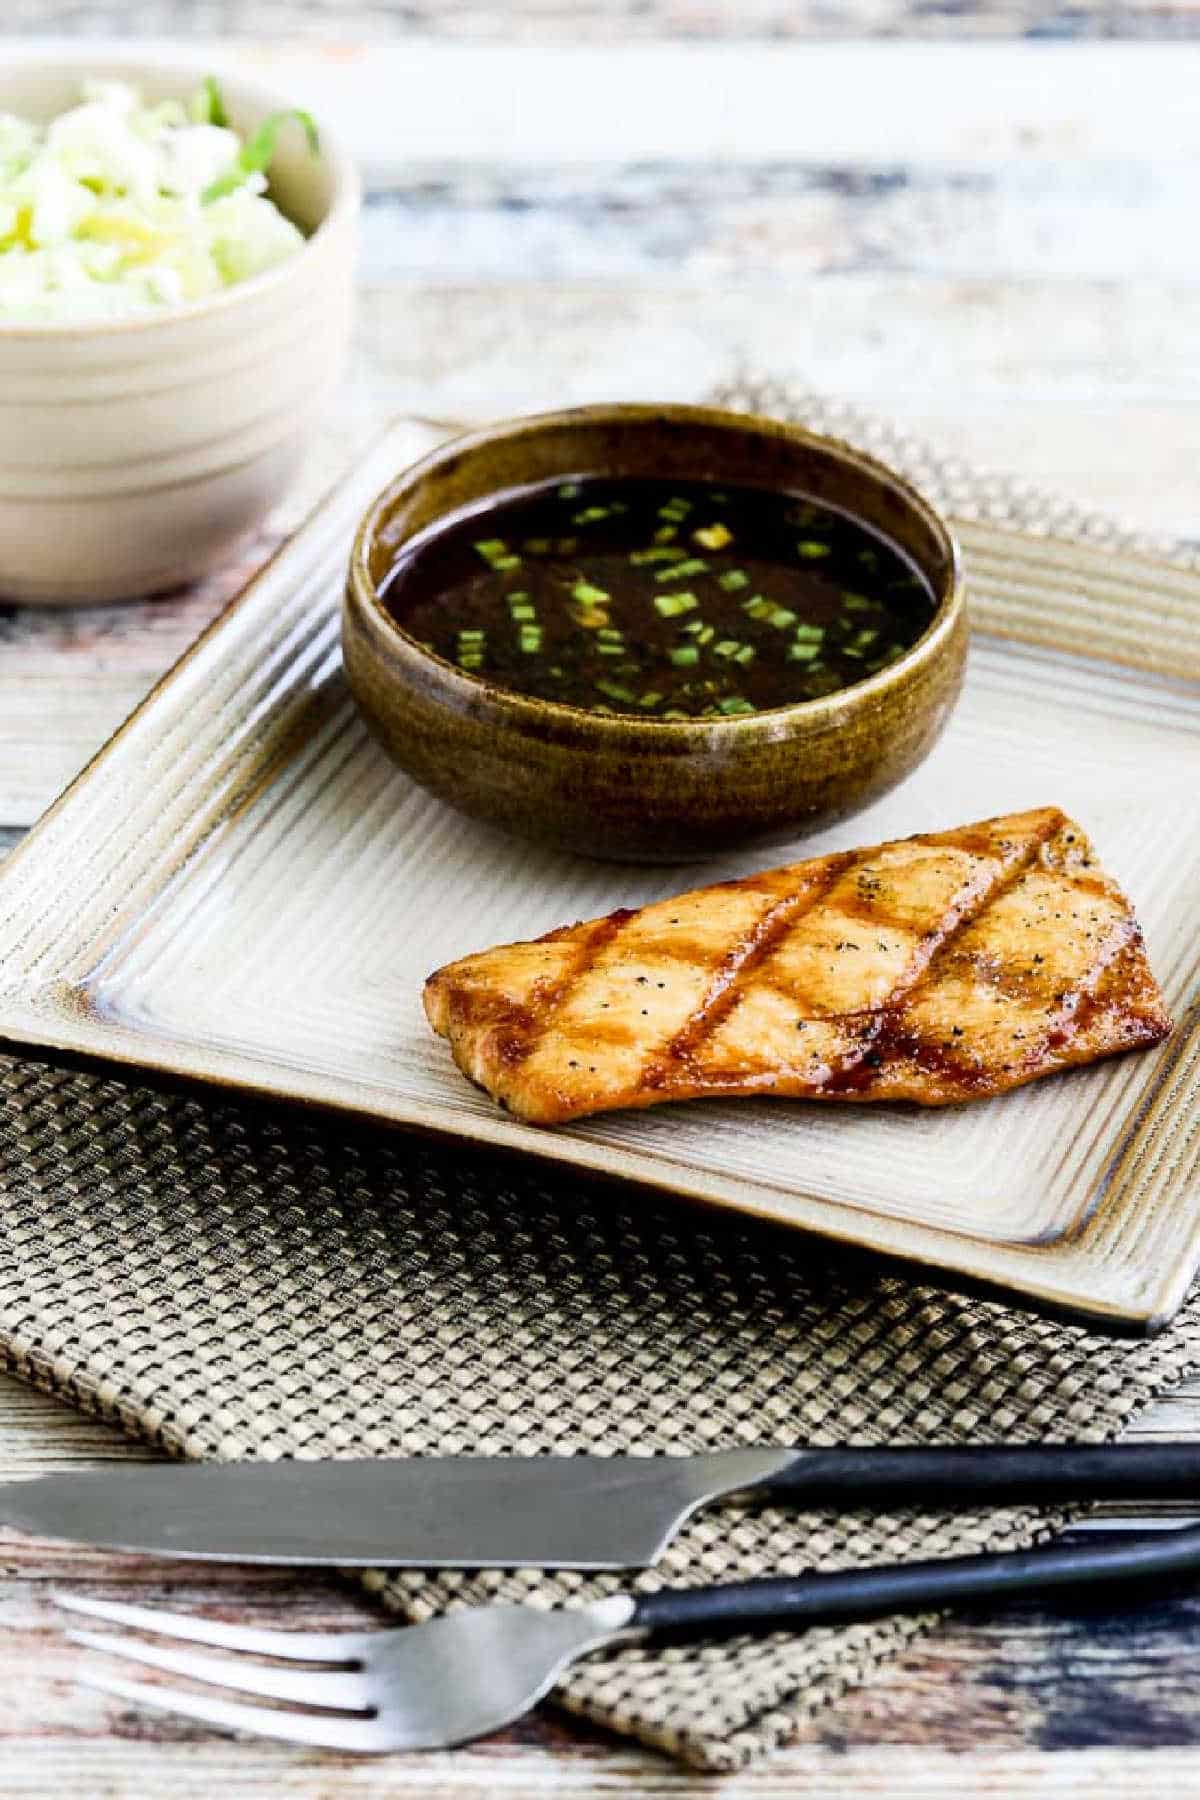 Grilled Mahi Mahi with Korean Dipping Sauce shown on serving plate